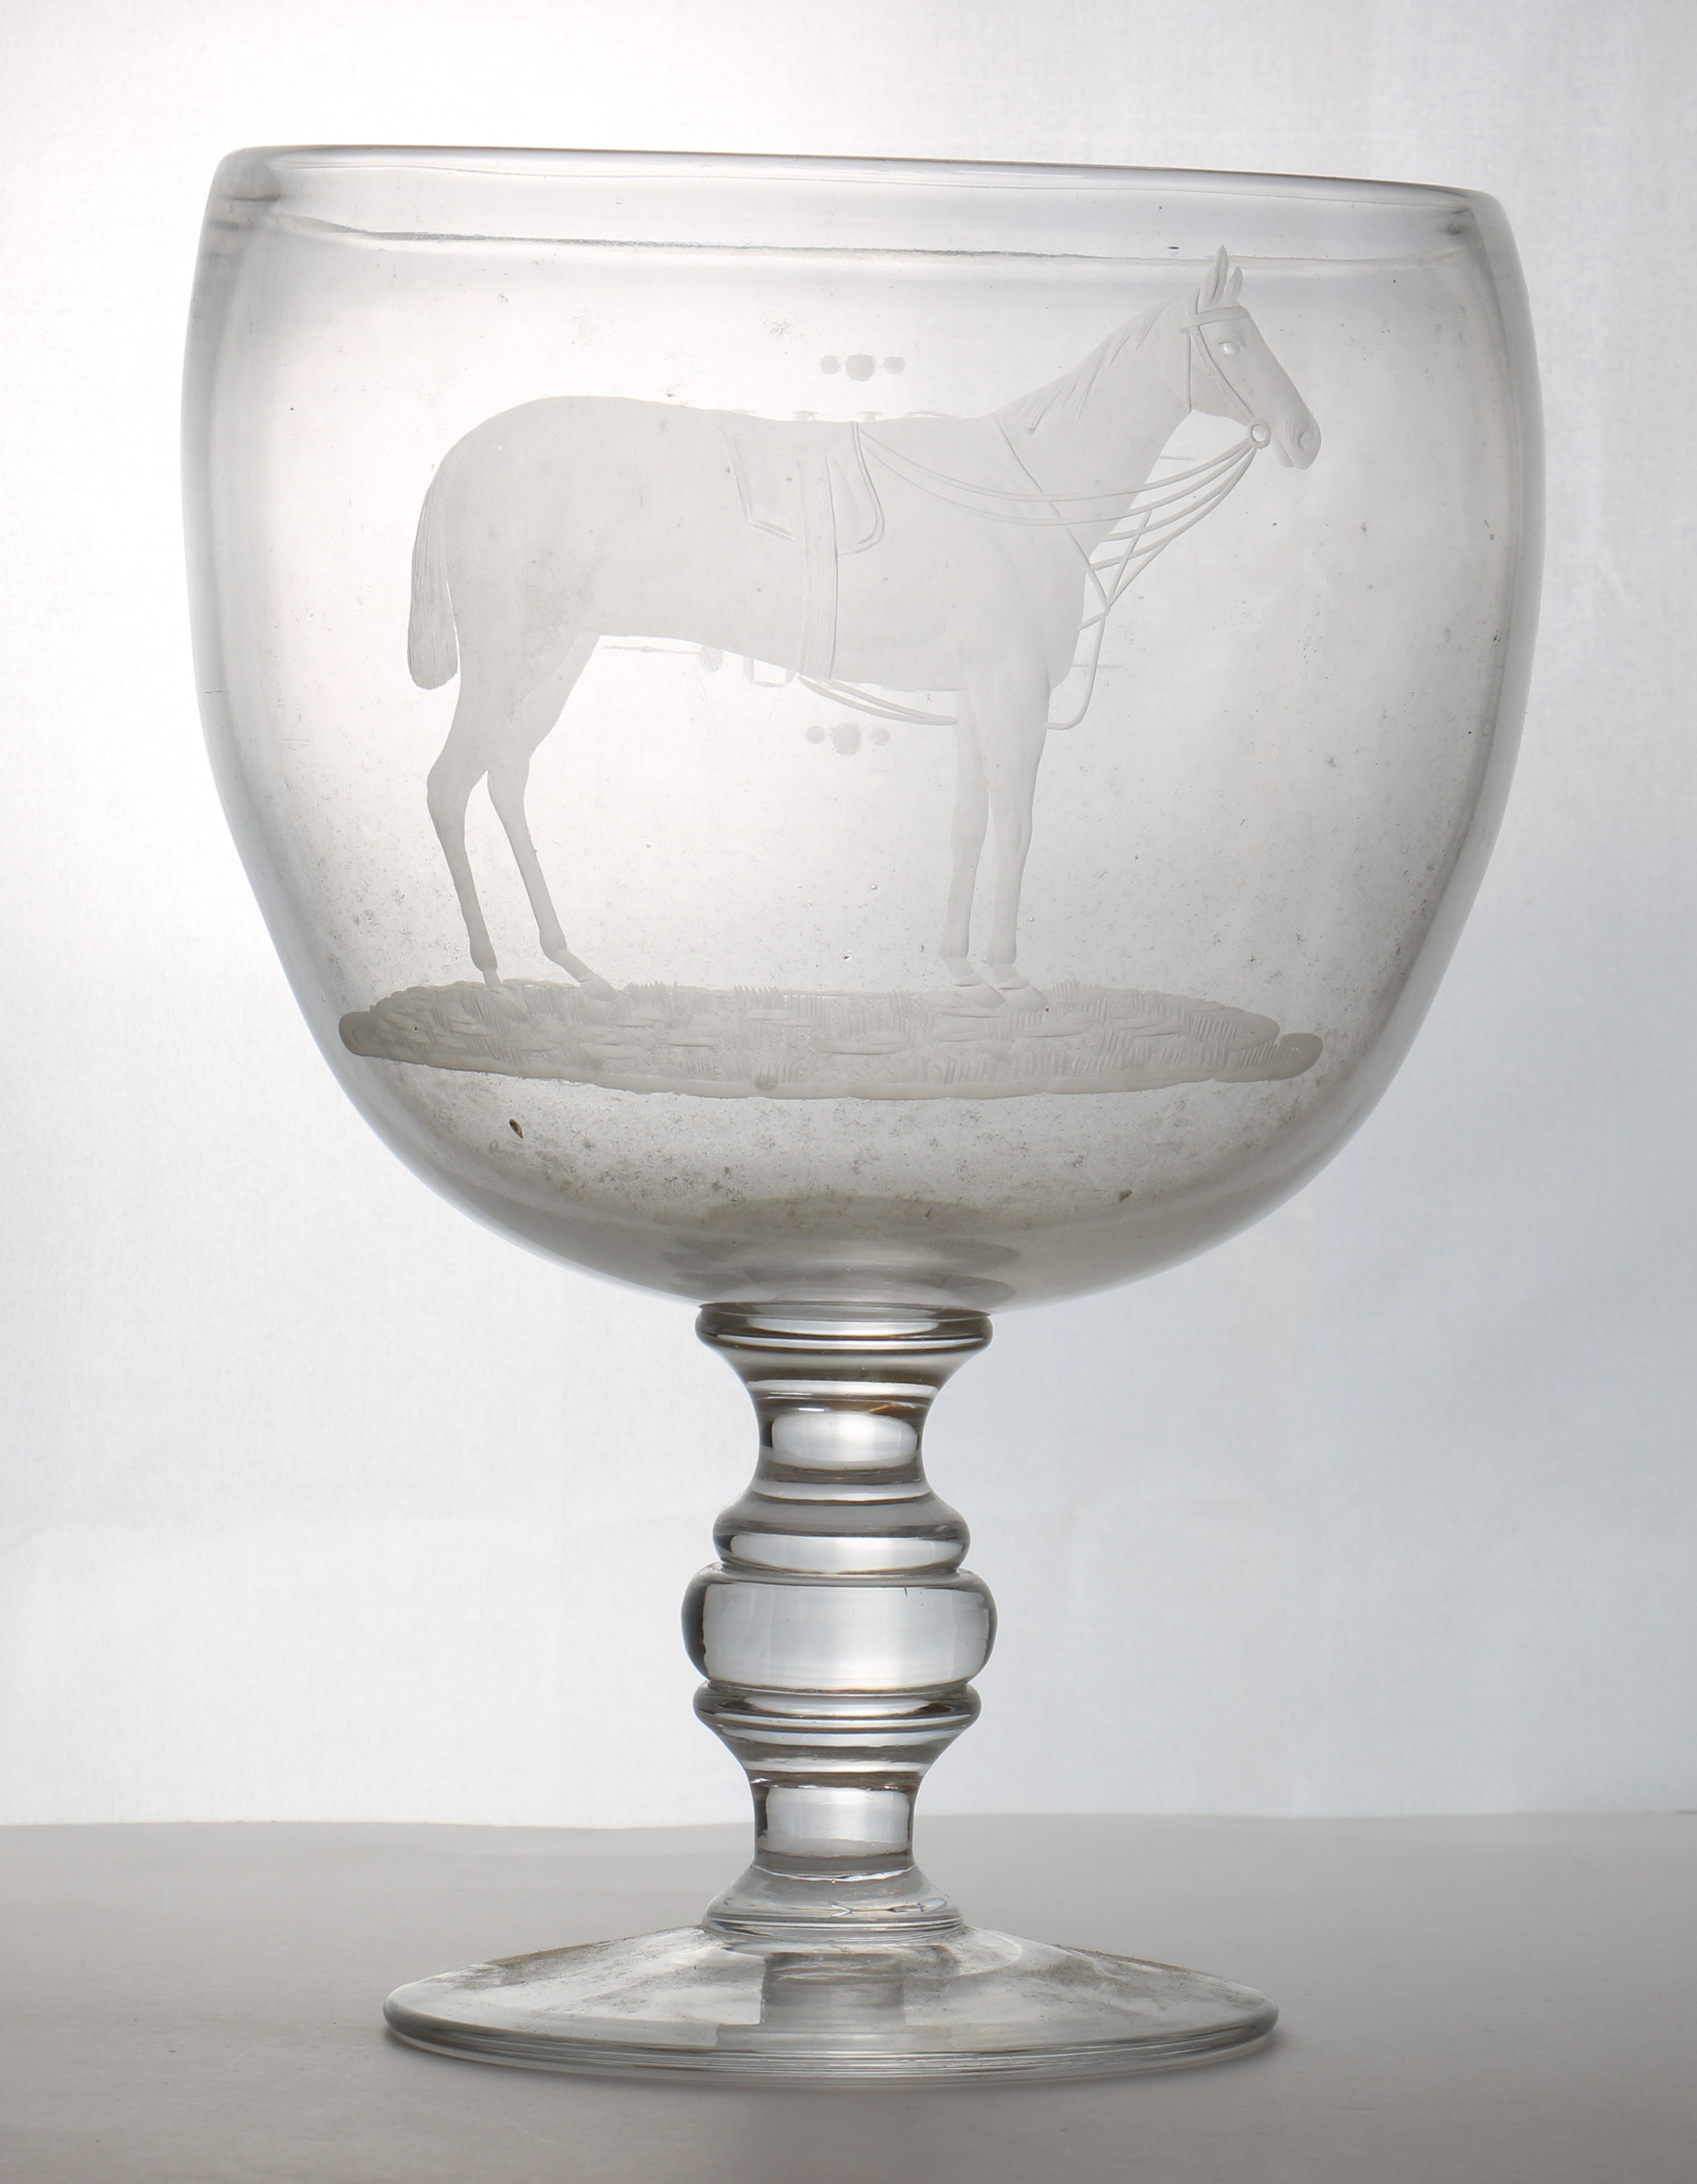 A large Equestrian goblet (£400-600)